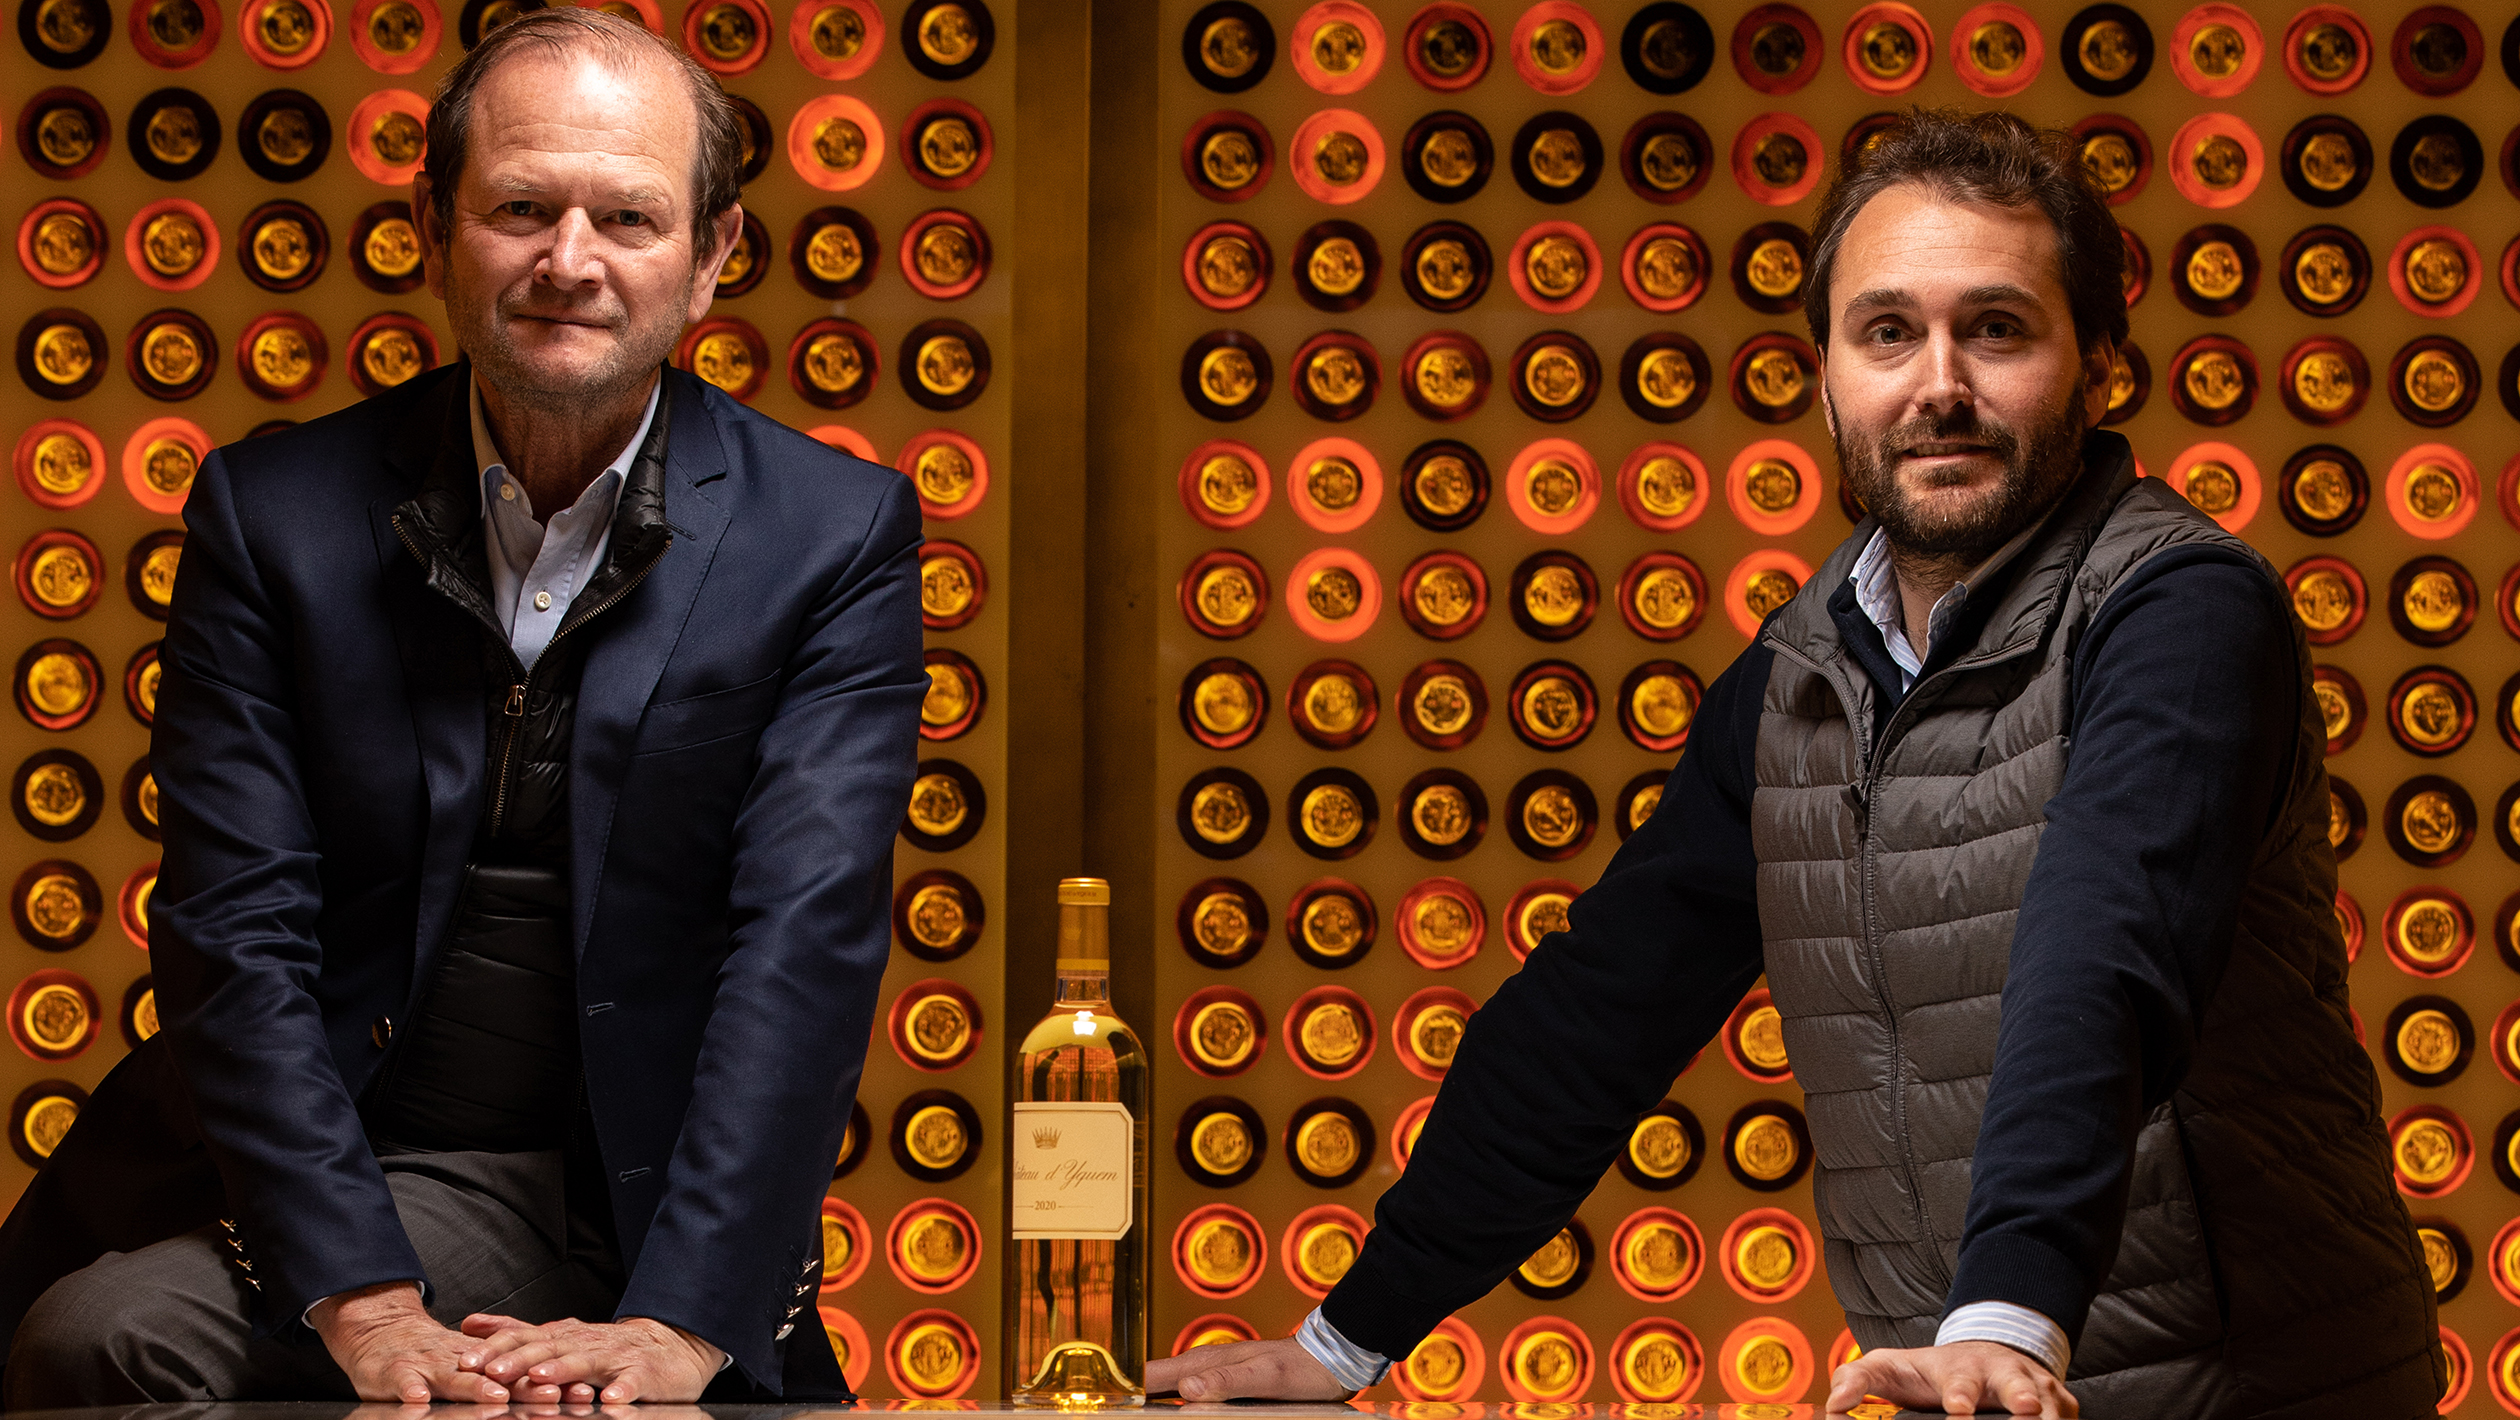 Pierre Lurton (left) and Lorenzo Pasquini (right) of Château d’Yquem